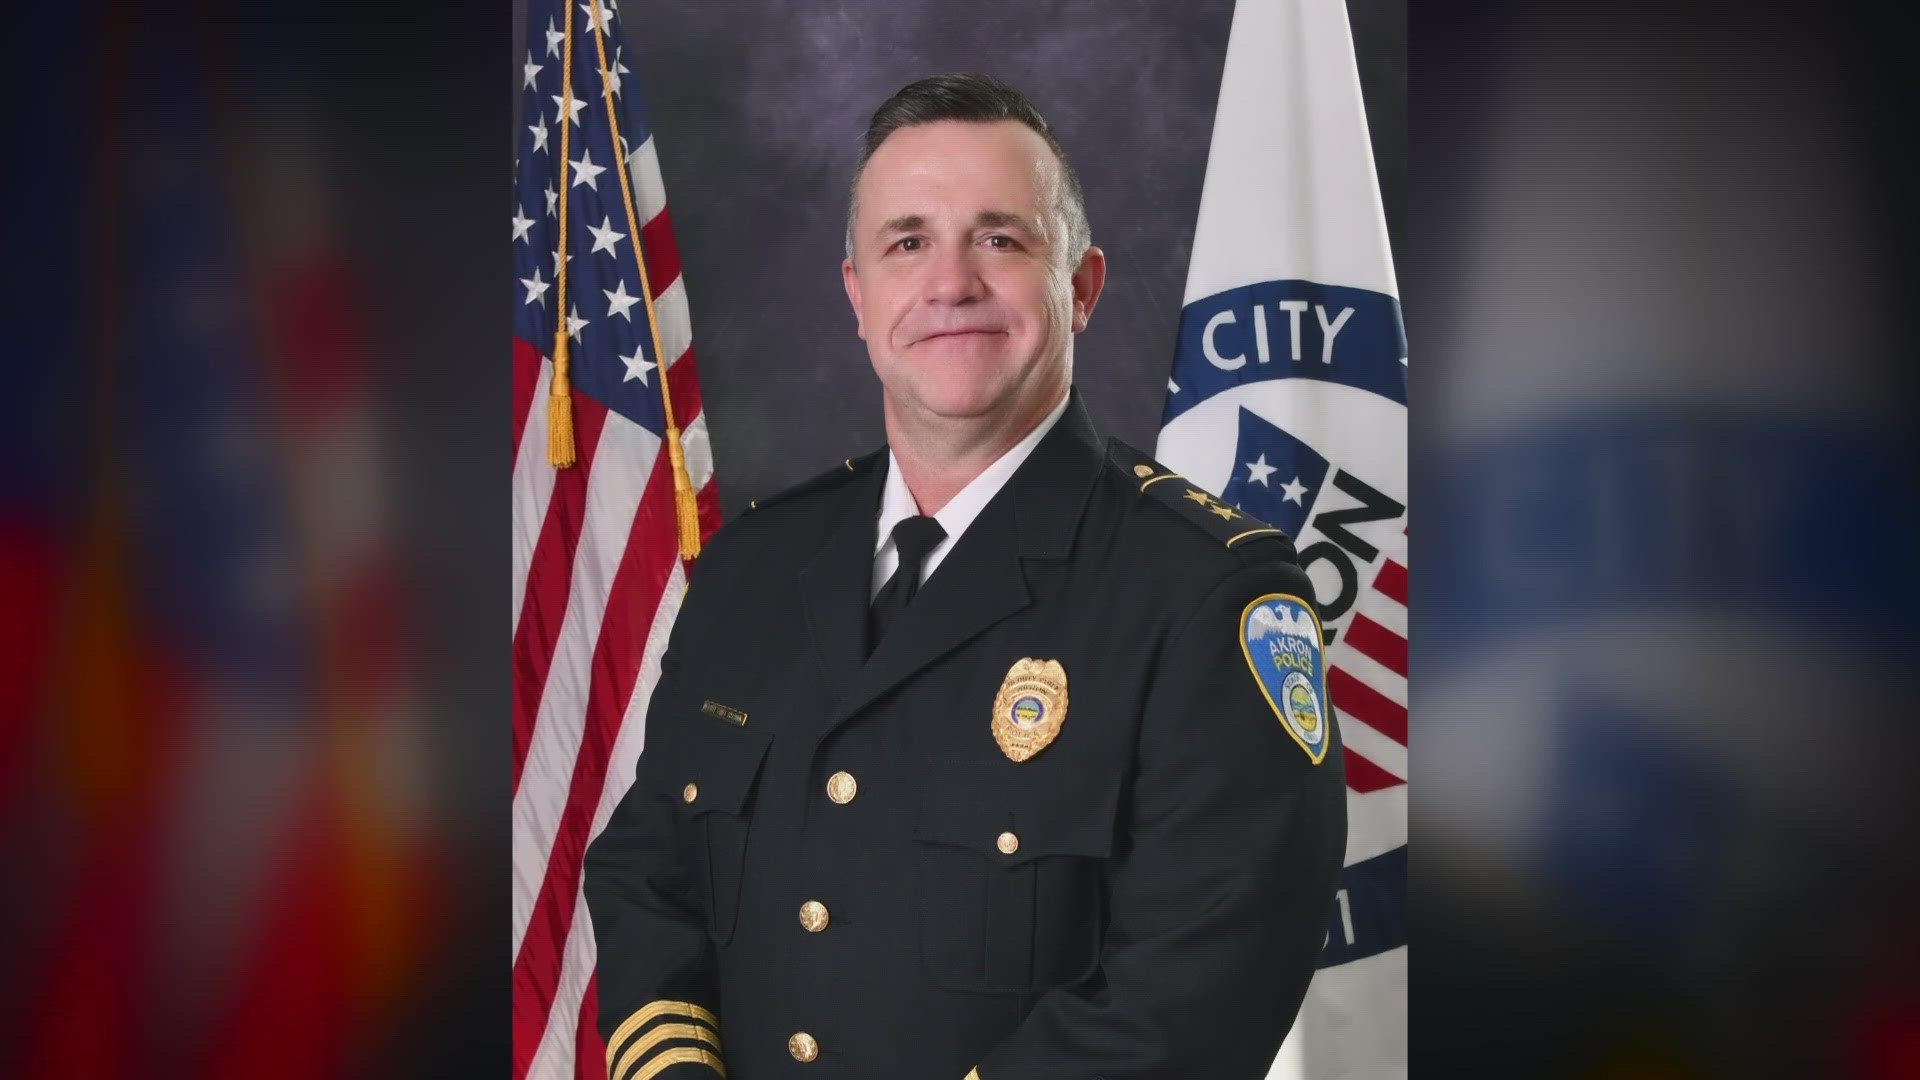 Acting Chief Brian Harding will participate in town hall meetings on Saturday, April 20 and Tuesday, April 23 for residents to learn more about the search process.